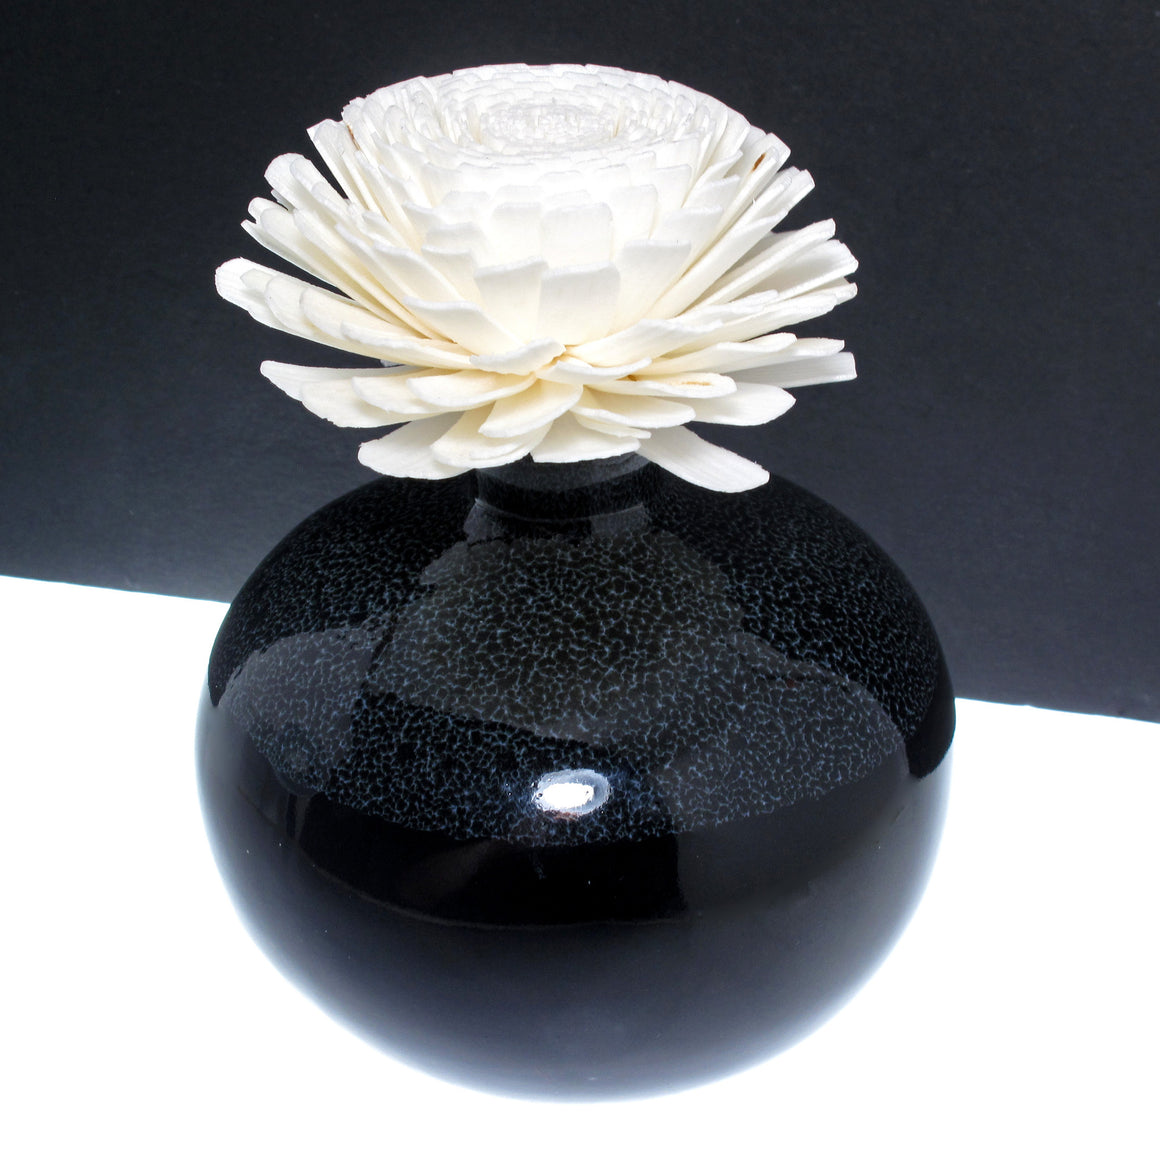 Sola Wood Flower Aroma Oil Diffuser with a Bendable Cotton Wire Wick, Zinnia - TropicaZona